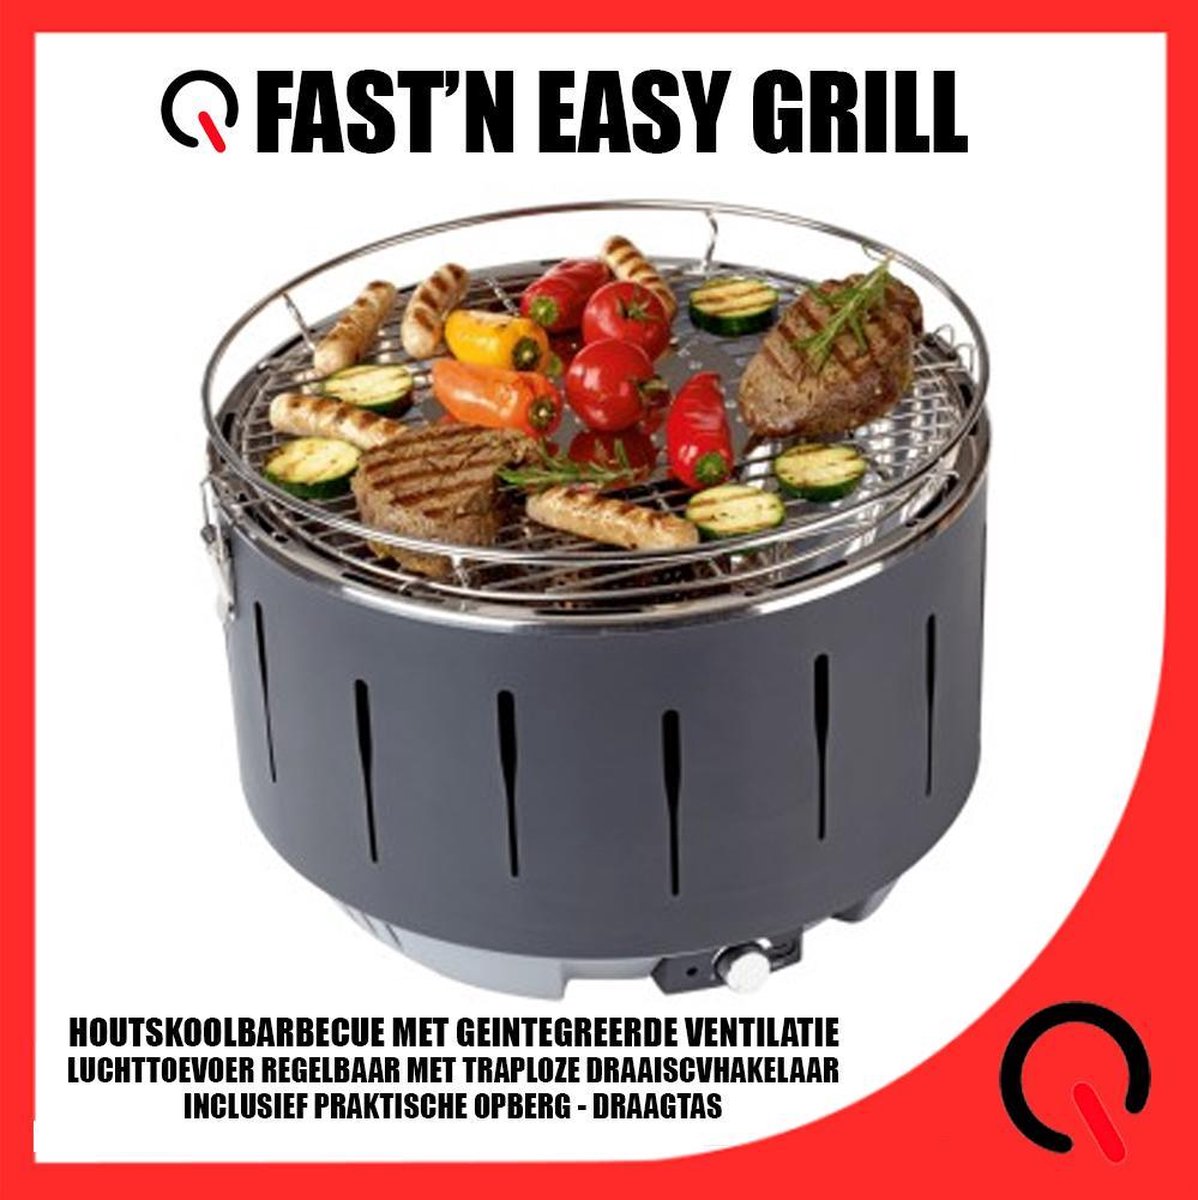 Easy grill